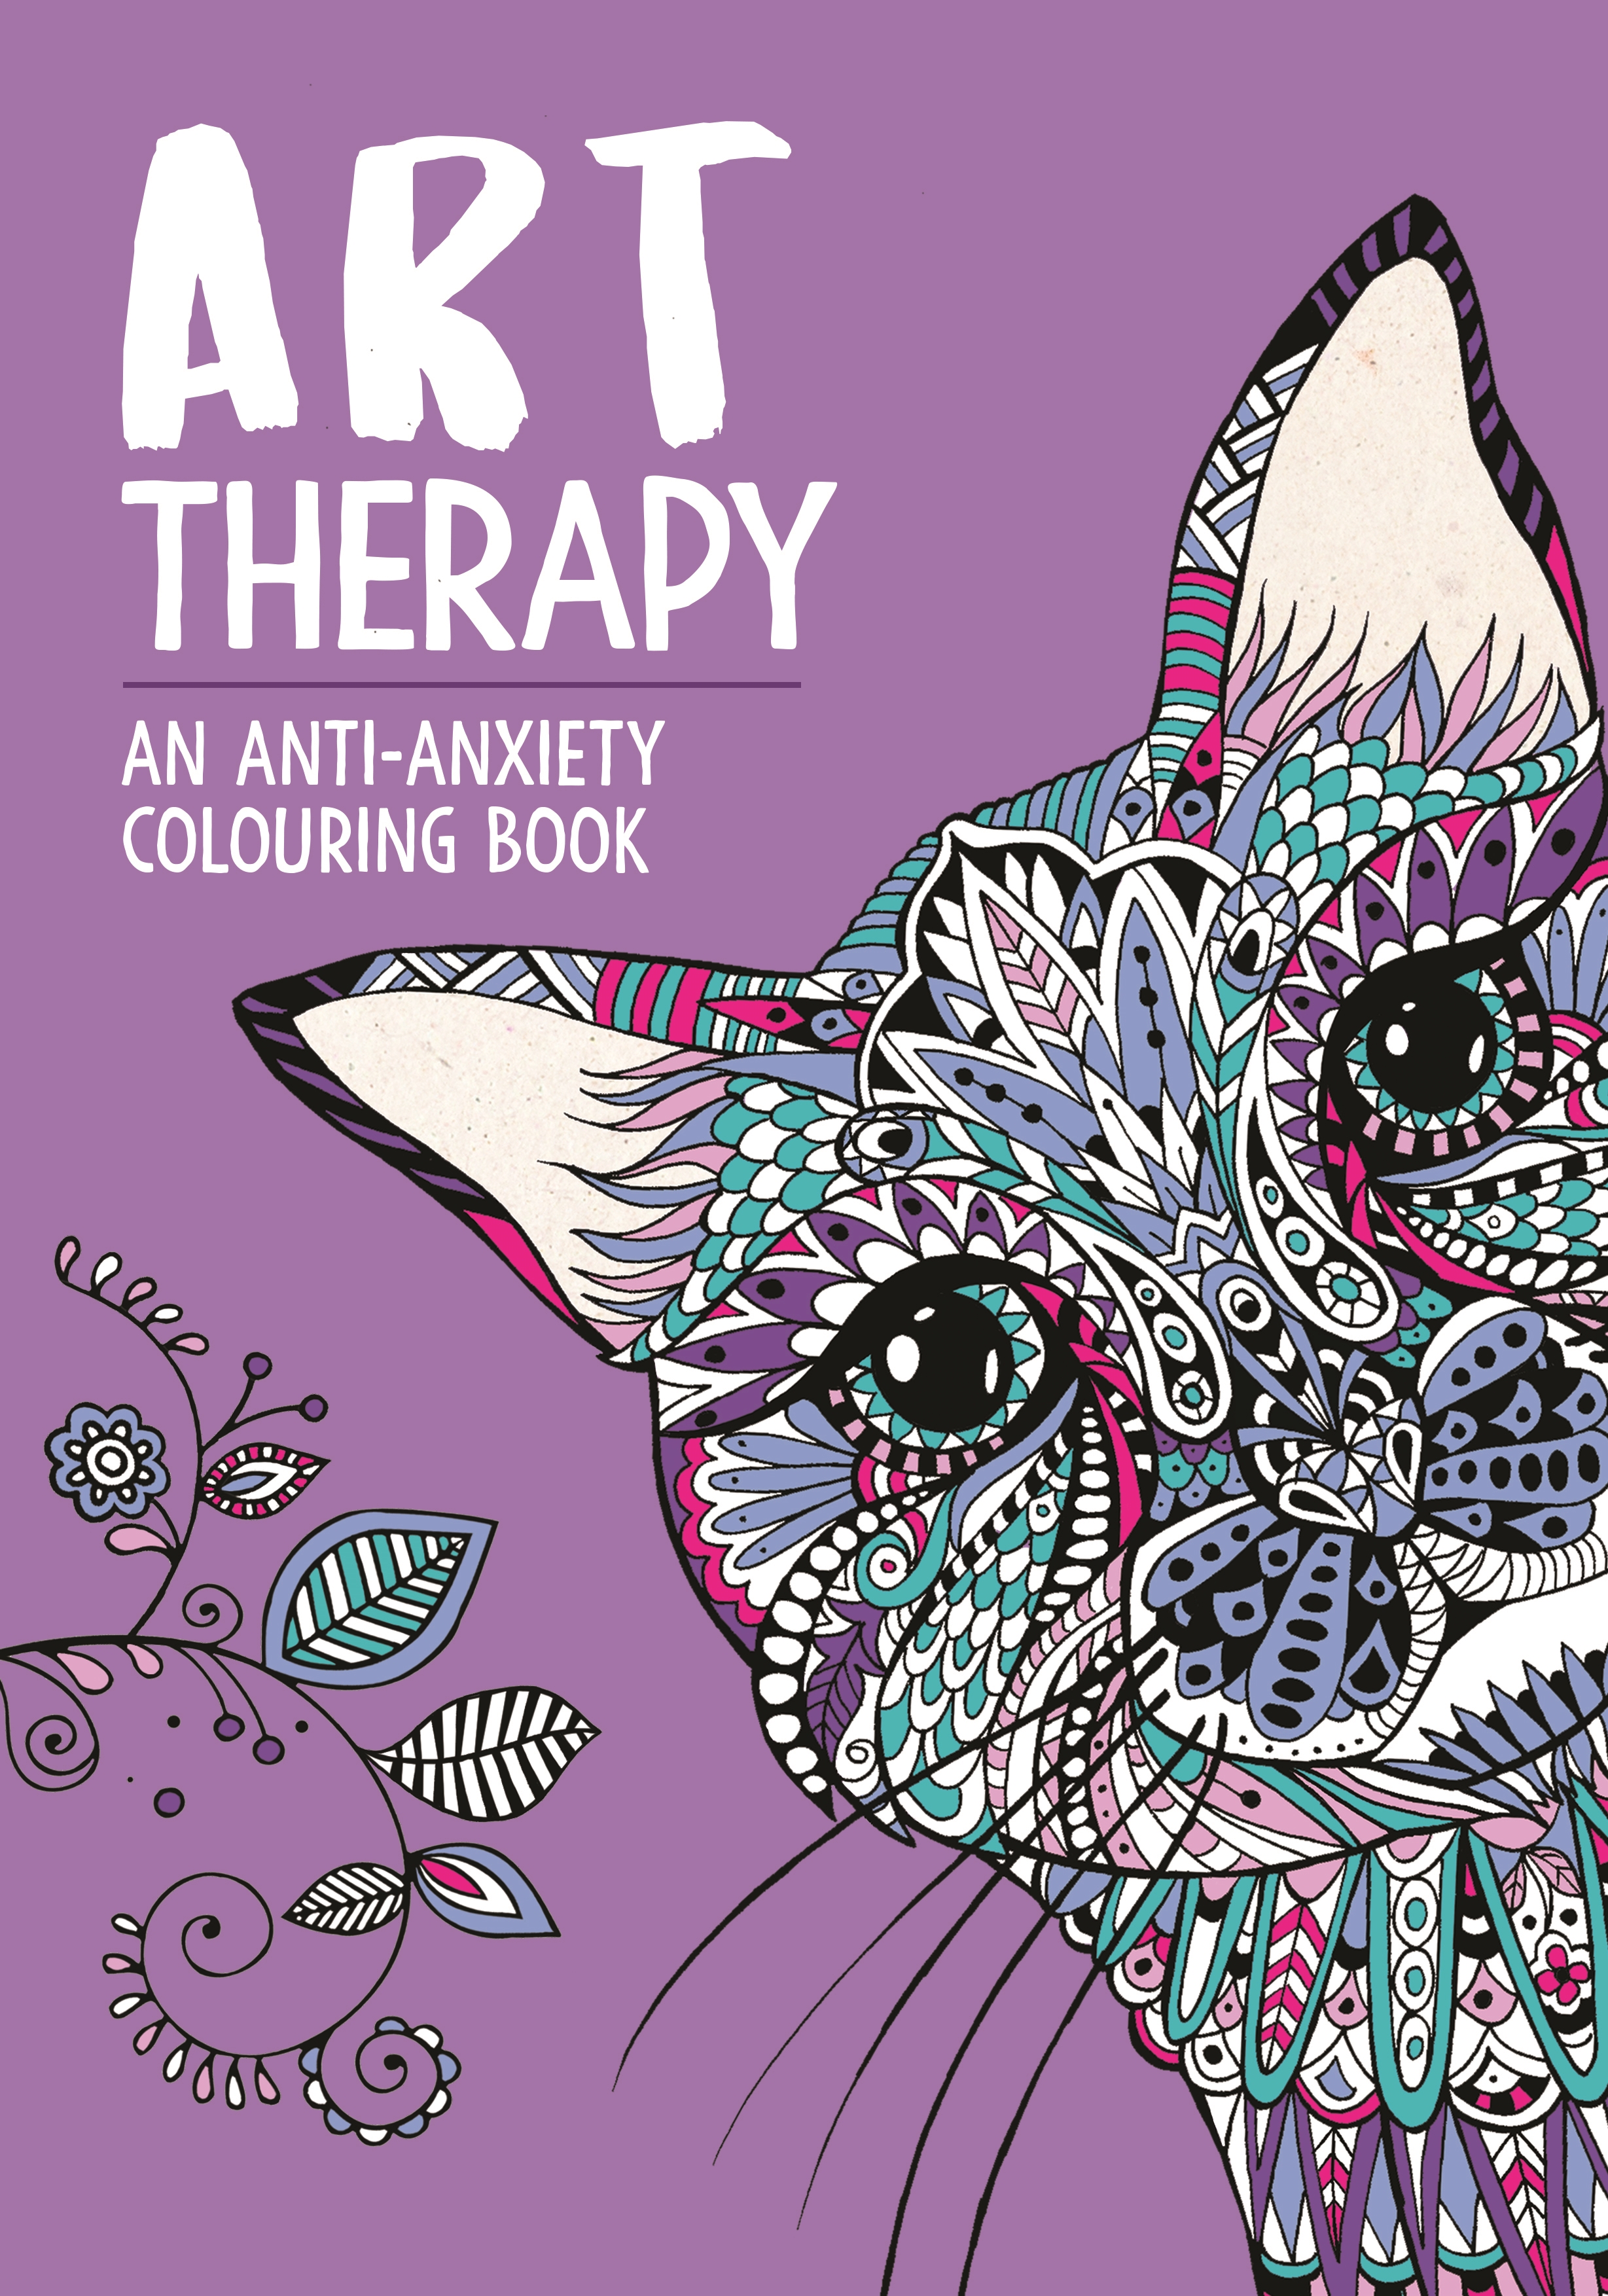 Art Therapy: An Anti-Anxiety Colouring Book for Adults by Richard Merritt